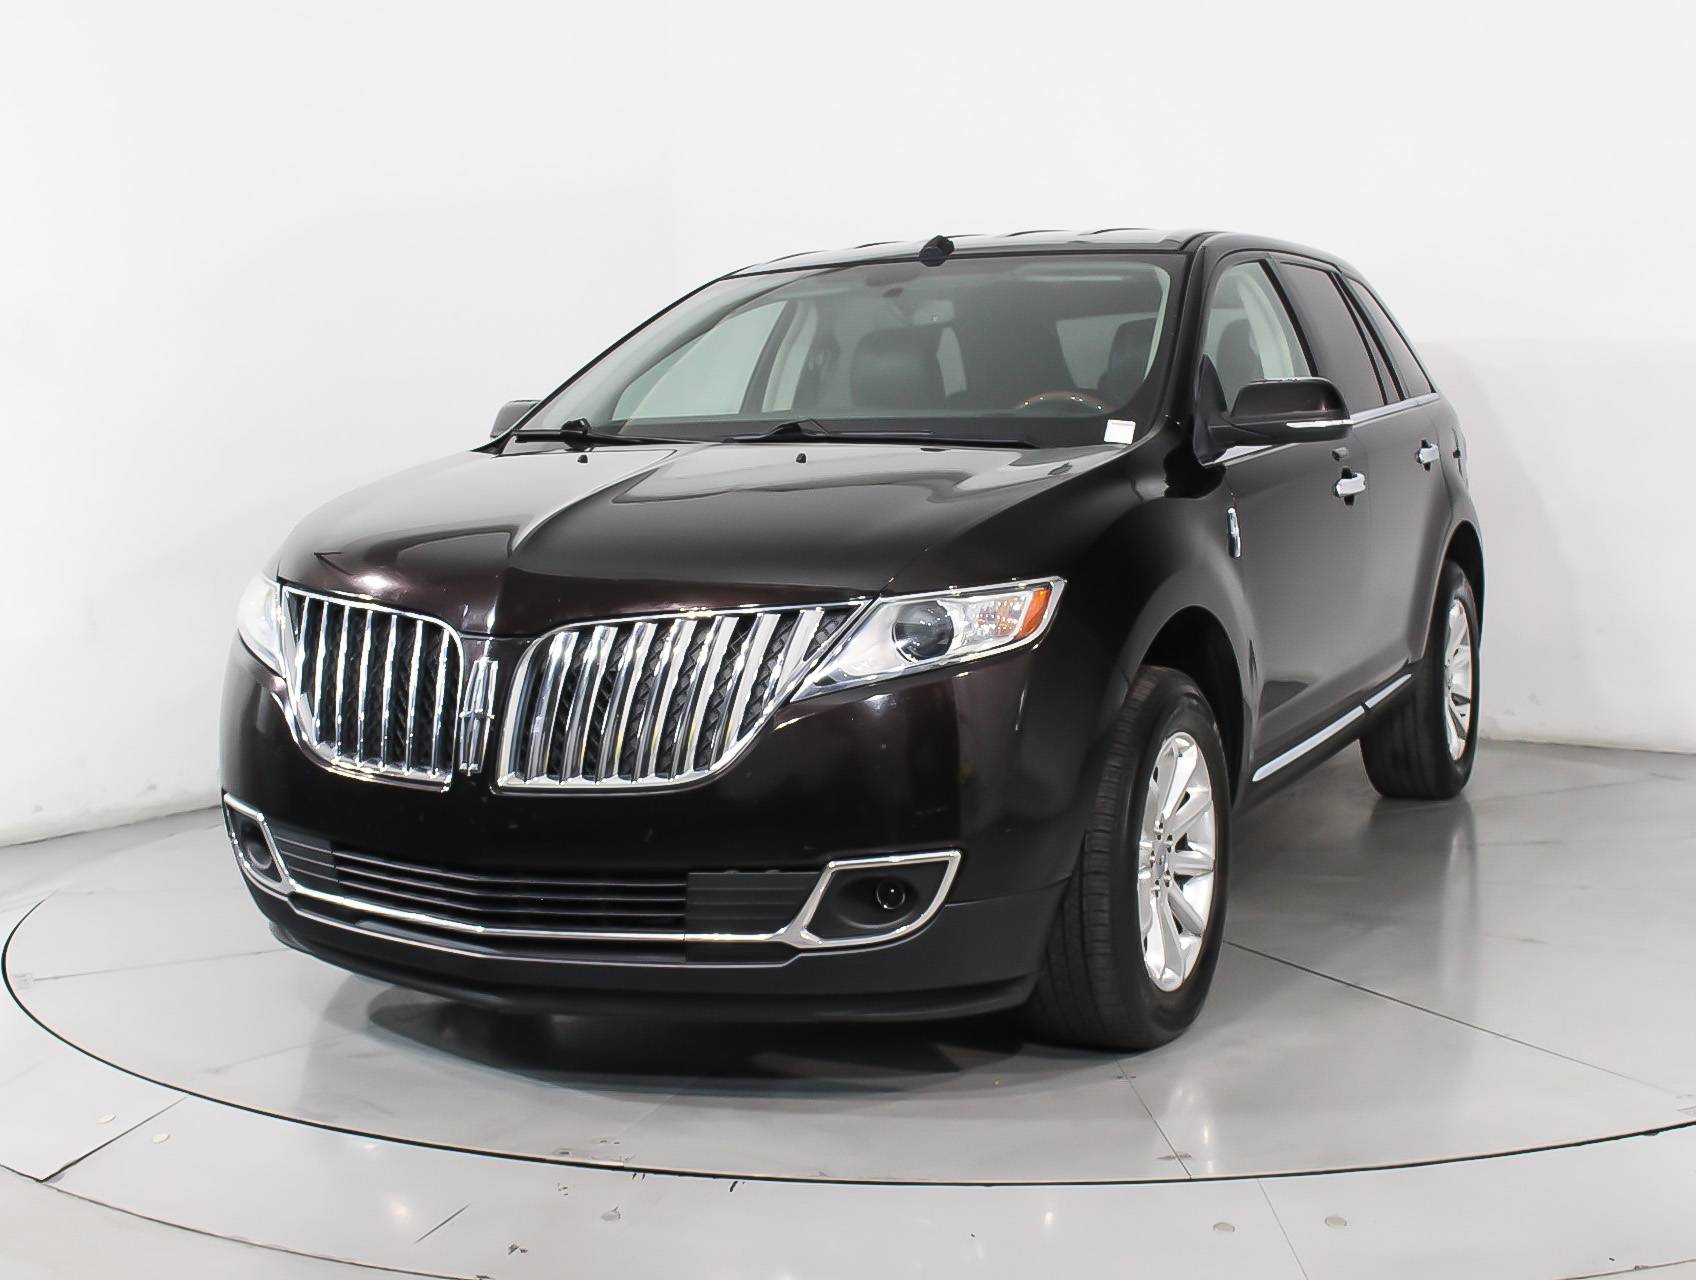 Used 2014 LINCOLN MKX for sale in MIAMI | 100368